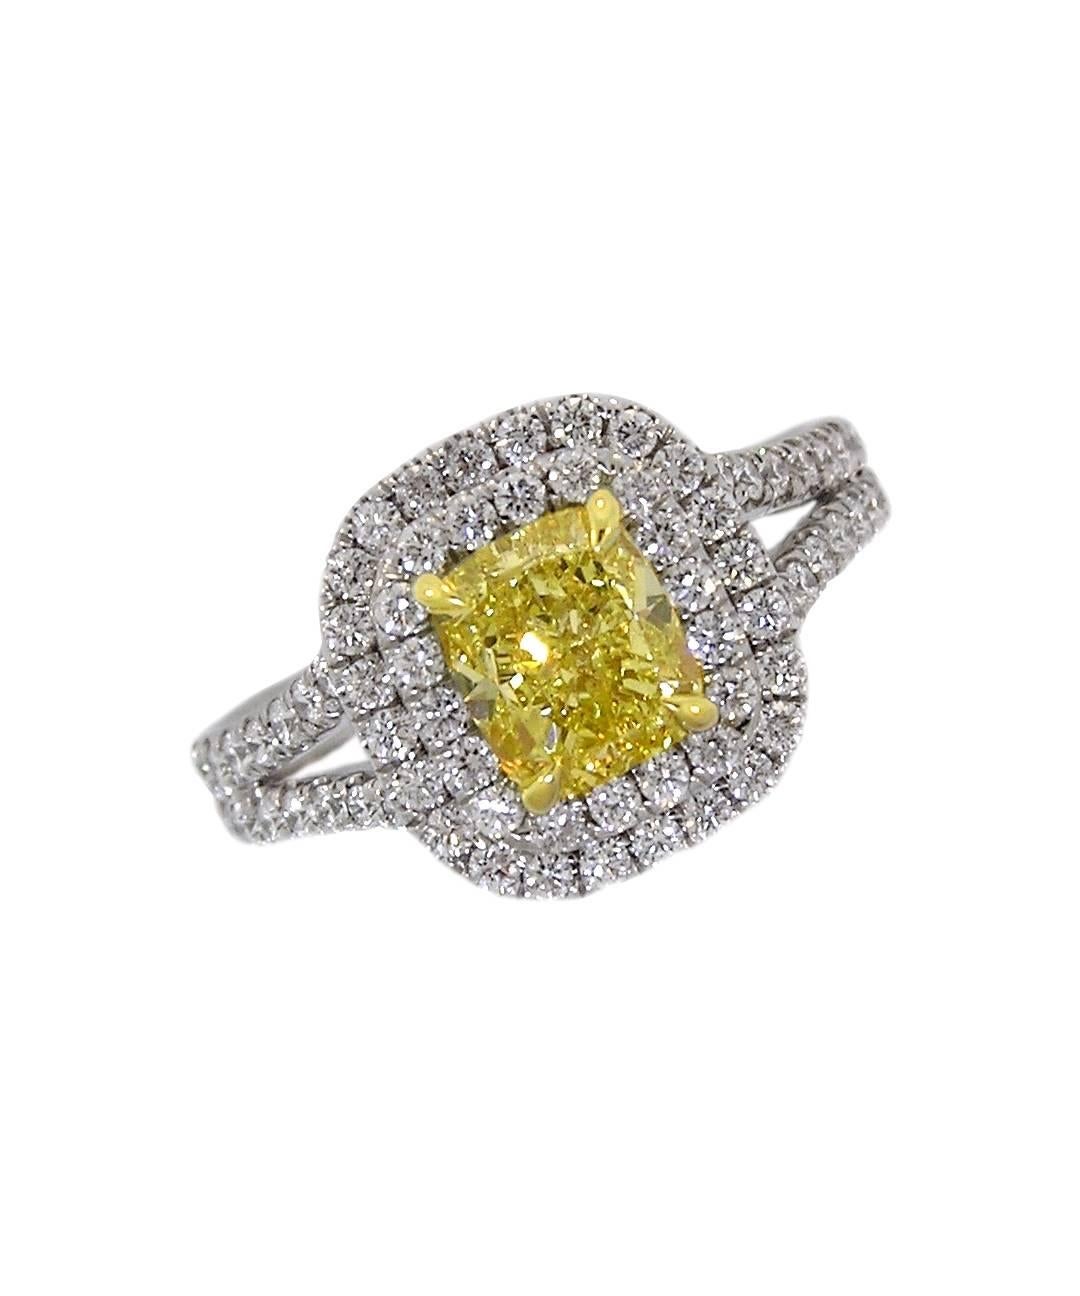 1.57 Natural Canary Diamond Platinum Ring In New Condition For Sale In Newport Beach, CA